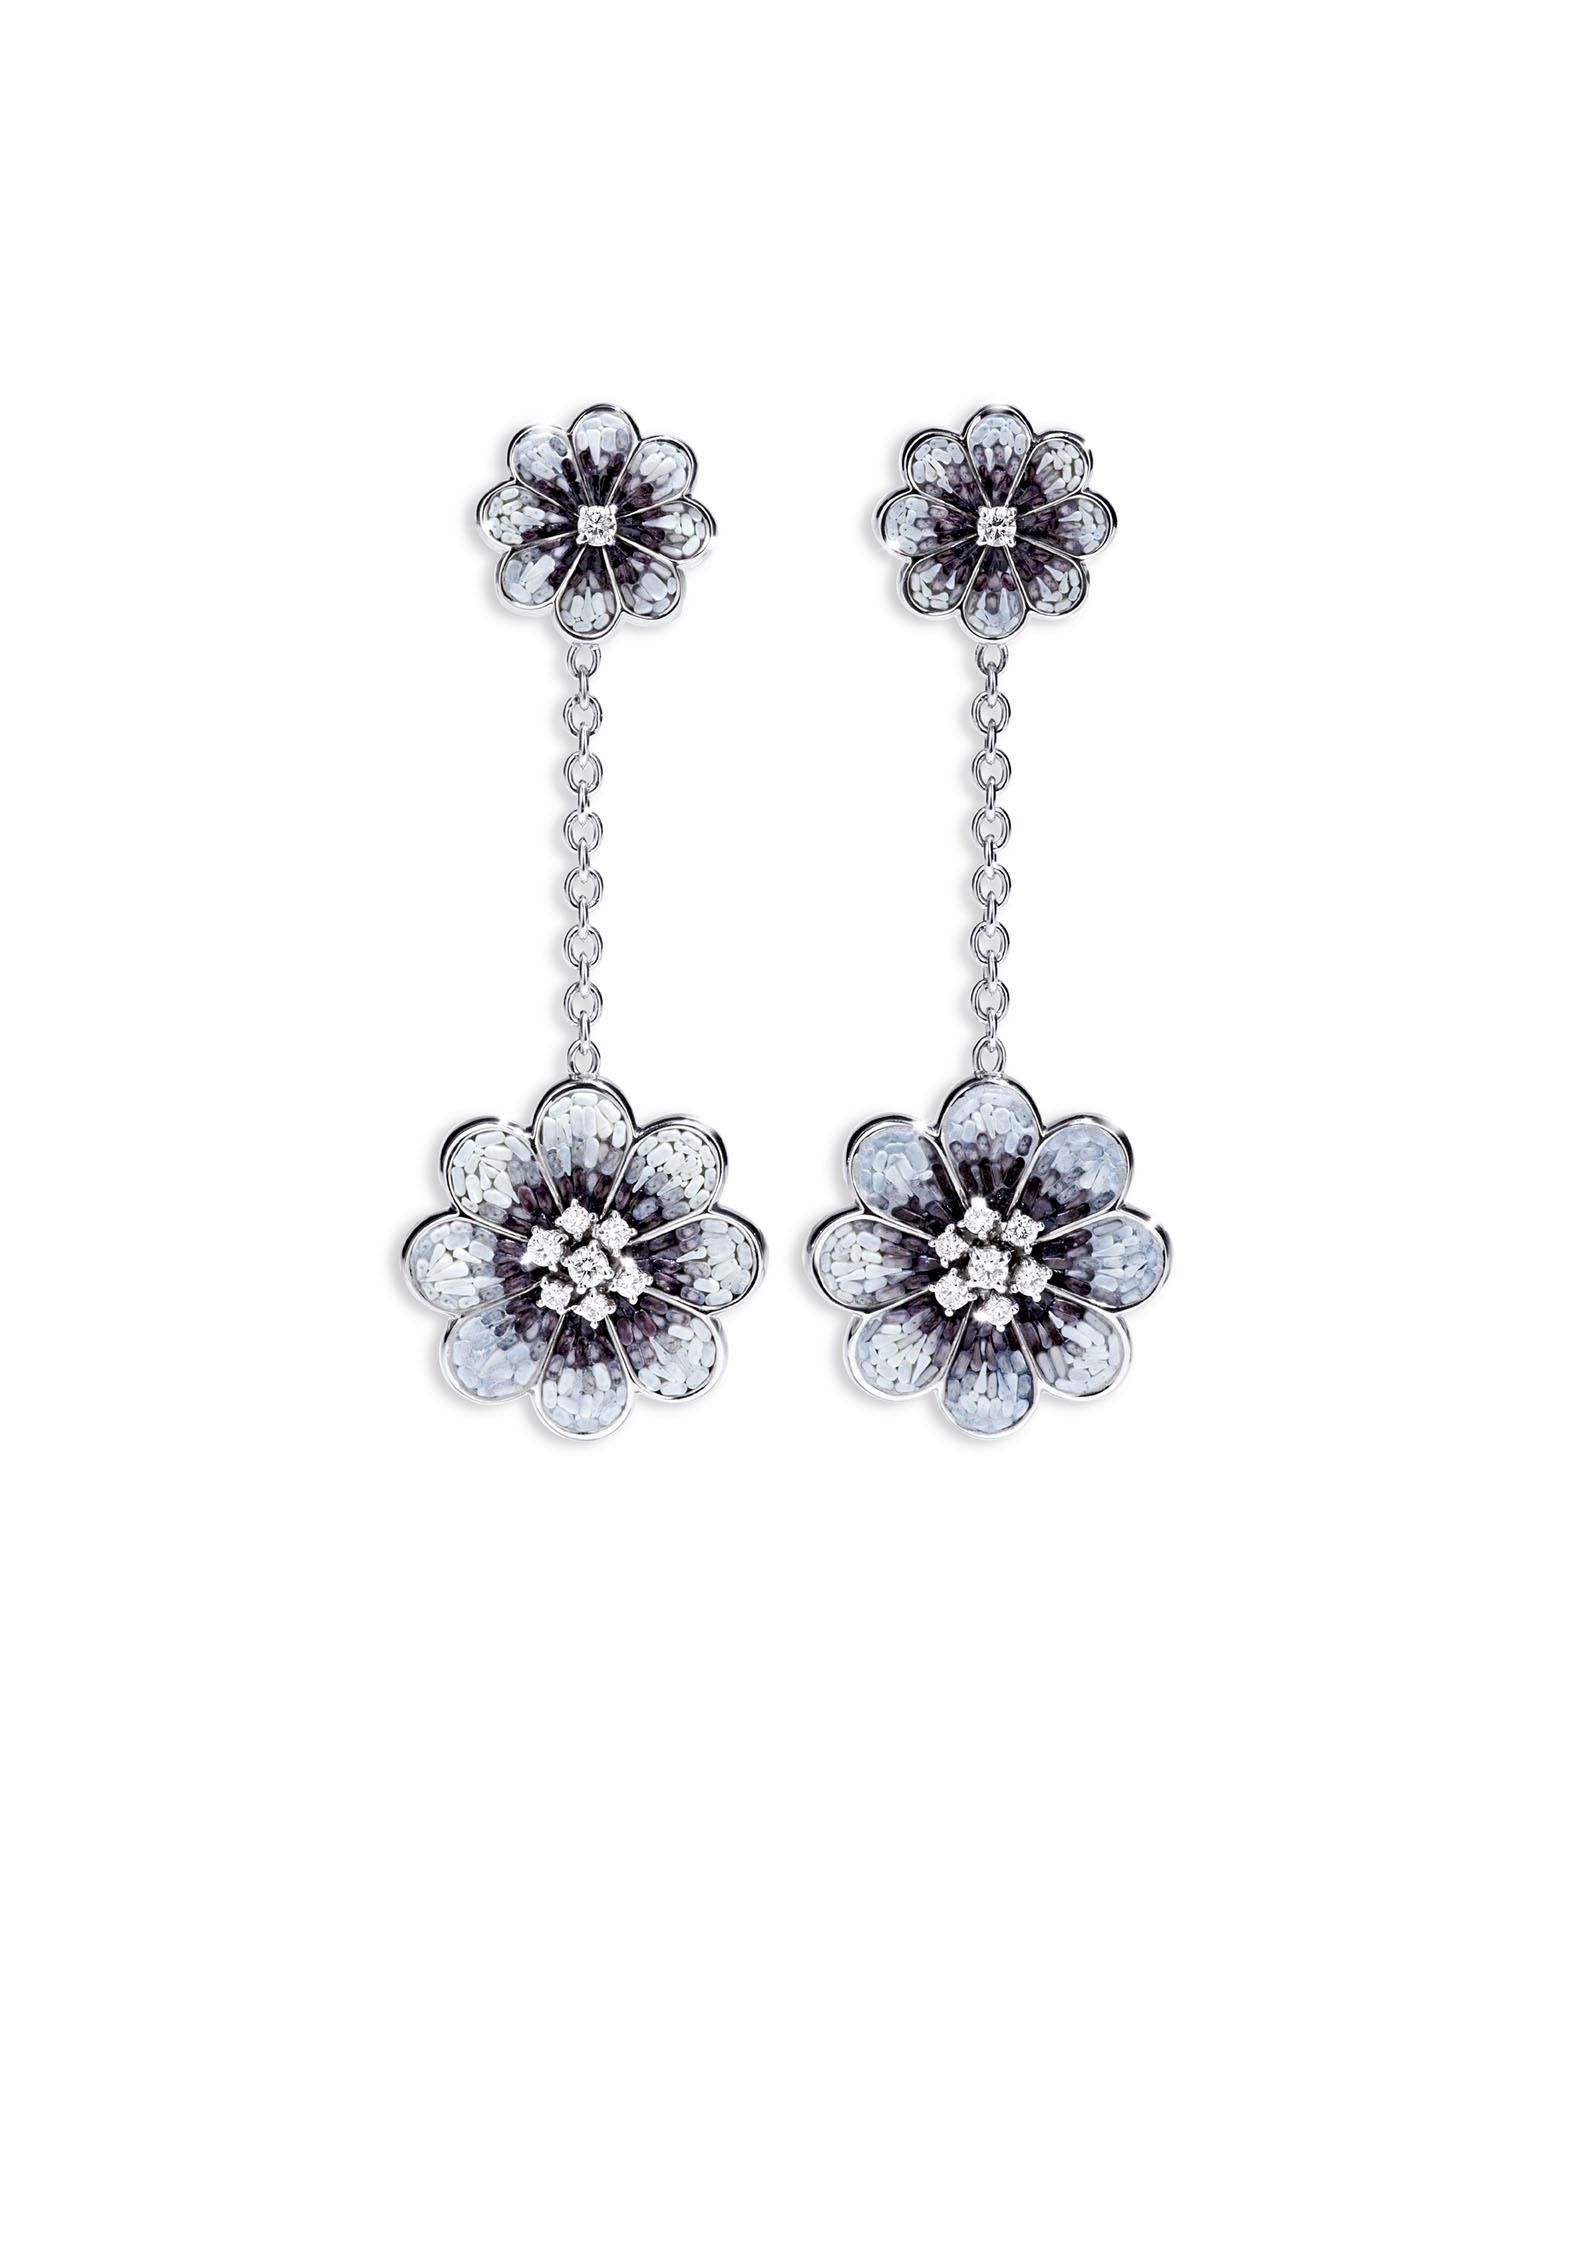 Modern Stylish Earrings White Gold White Diamonds Hand Decoated with Micro Mosaic For Sale